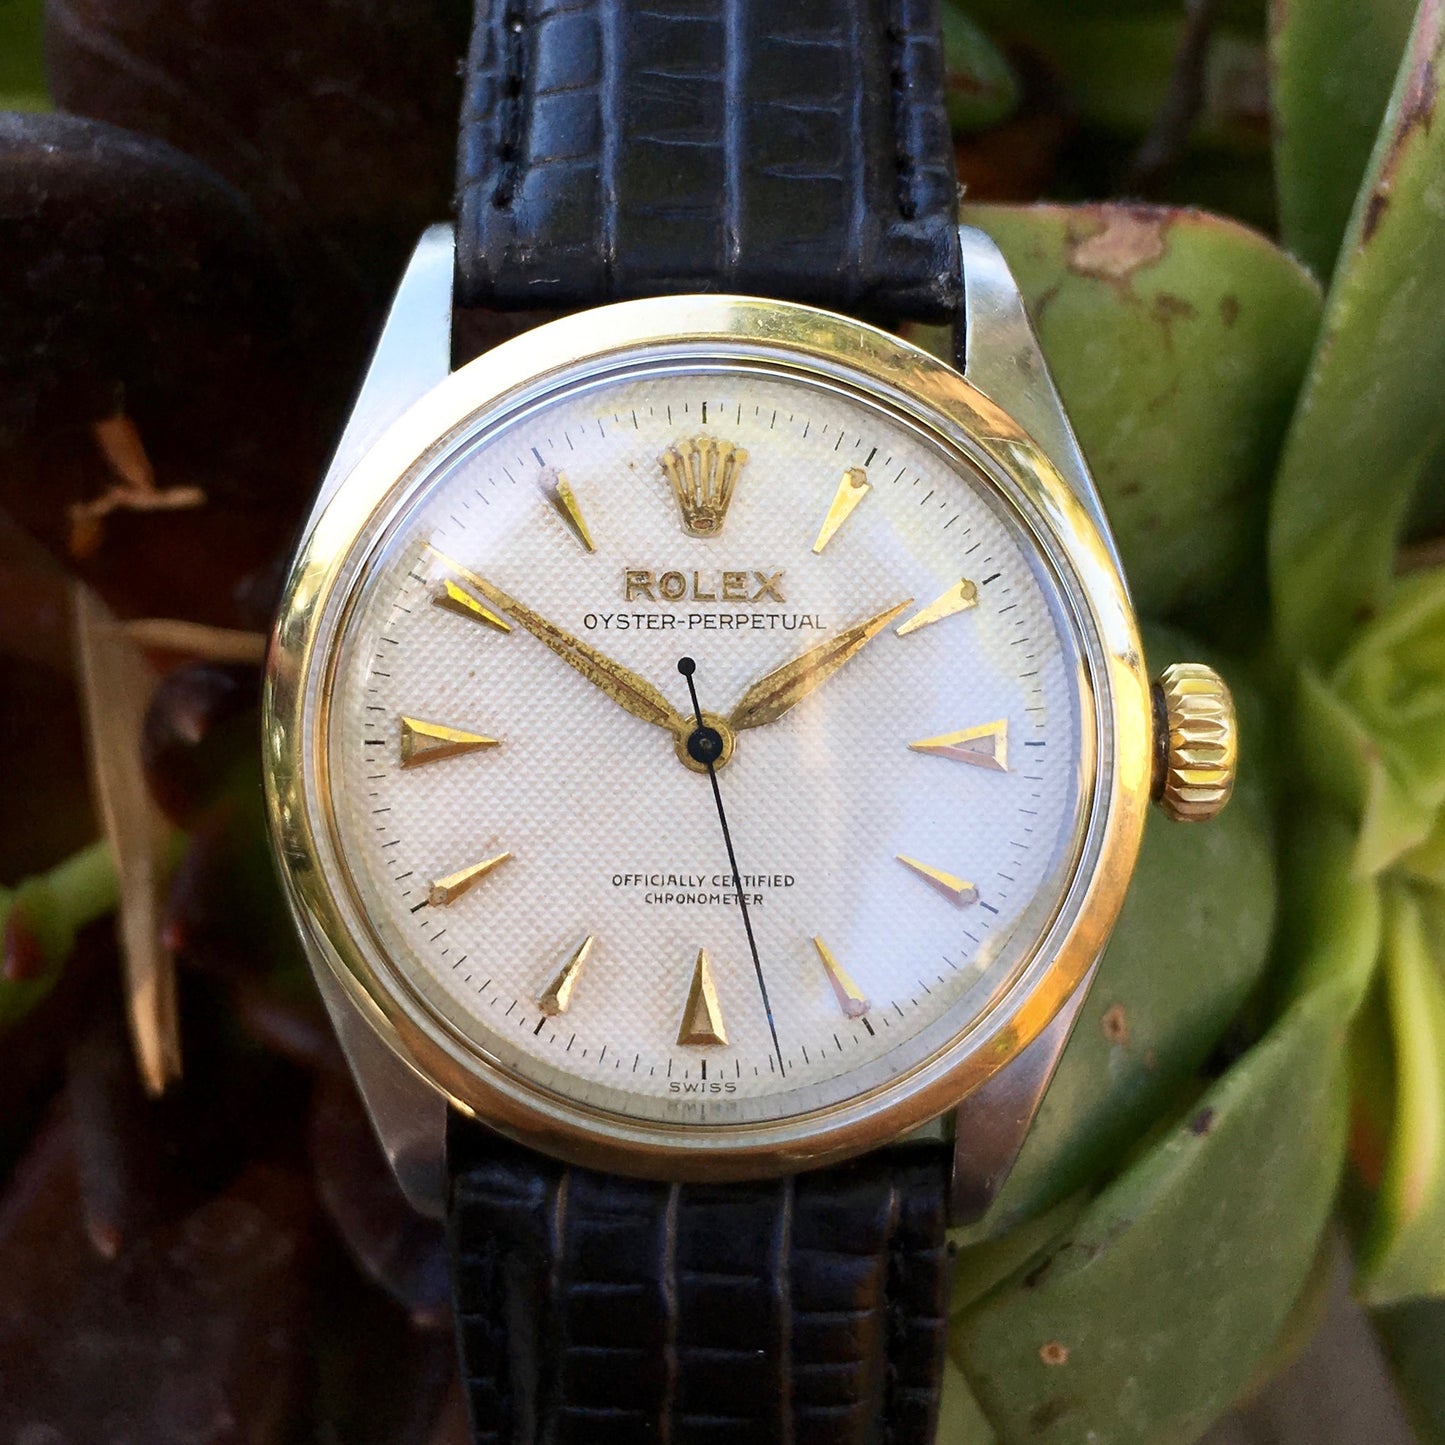 Vintage Rolex Oyster Perpetual 6284 Two Tone Steel White Waffle Dial Watch - Hashtag Watch Company